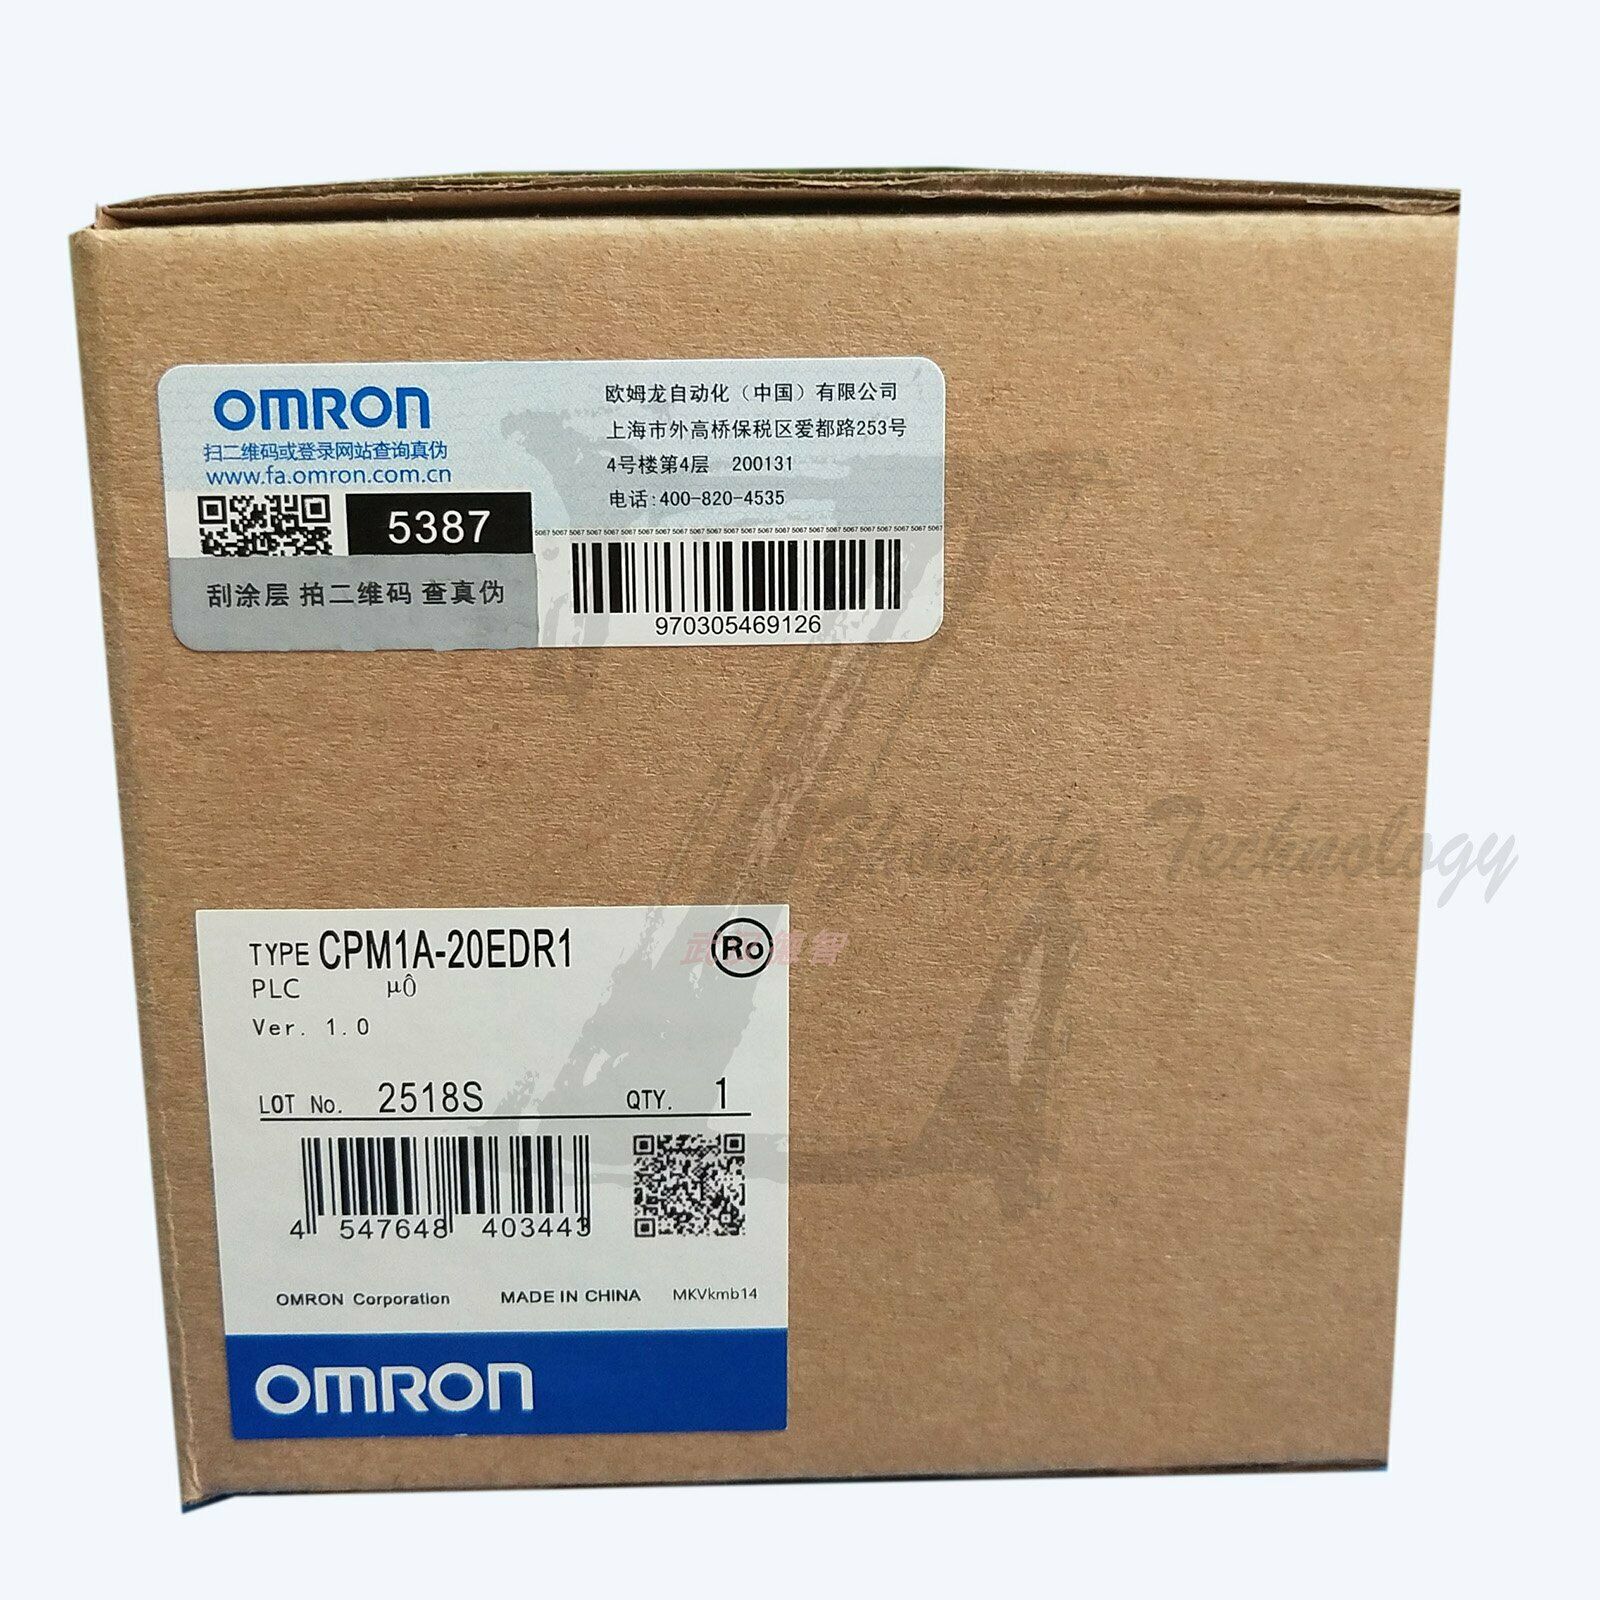 1pc new Omron CPM1A-20EDR1 module one year warranty KOEED 101-200, 80%, import_2020_10_10_031751, Omron, Other